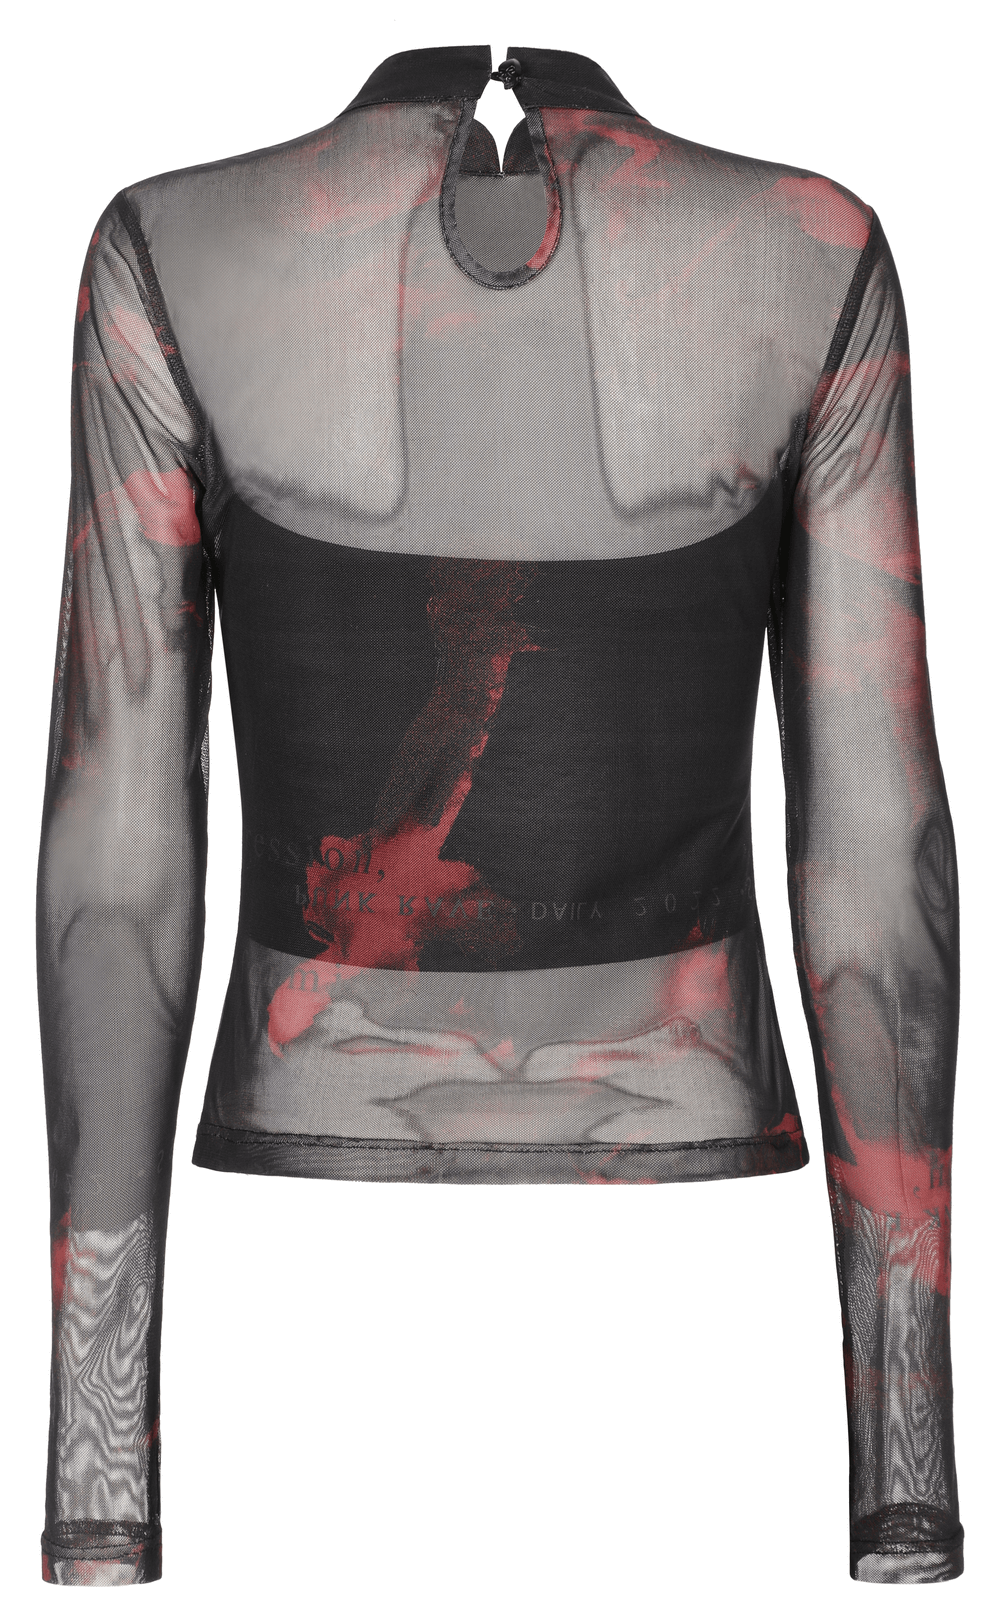 Stylish Women's Mesh Top with Stand Сollar and Red Print